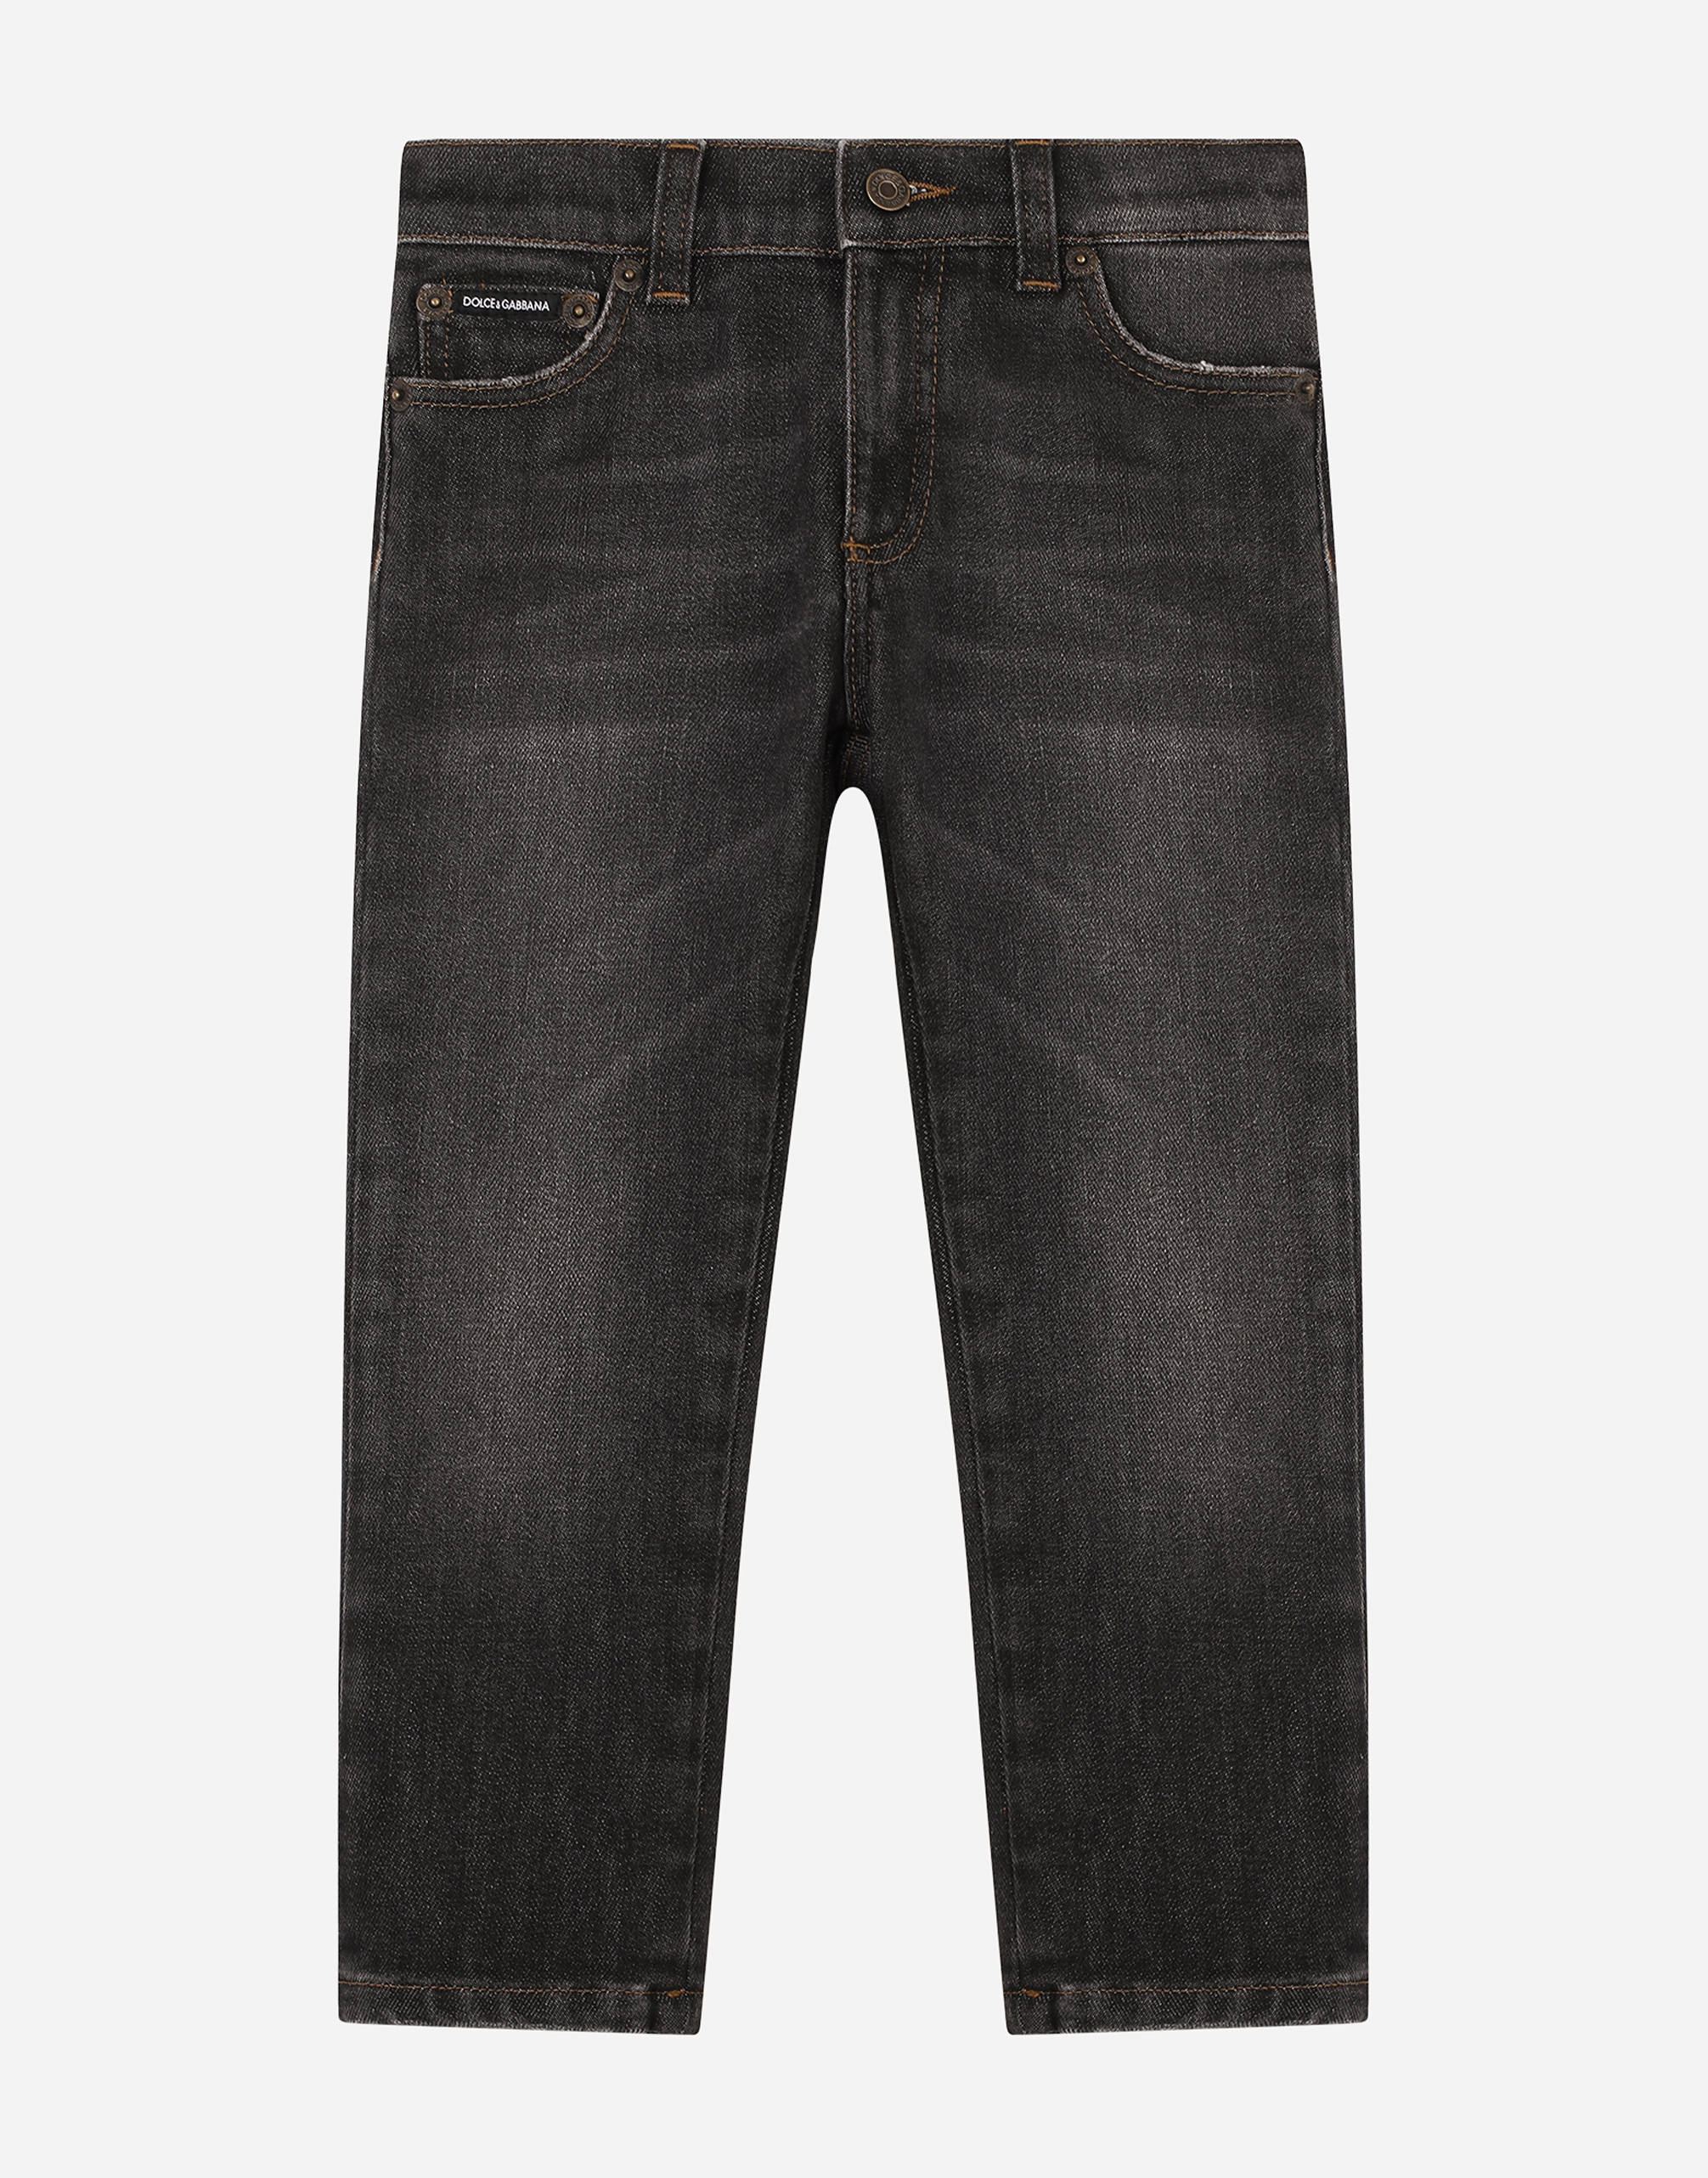 Charcoal wash slim-fit stretch jeans in Grey